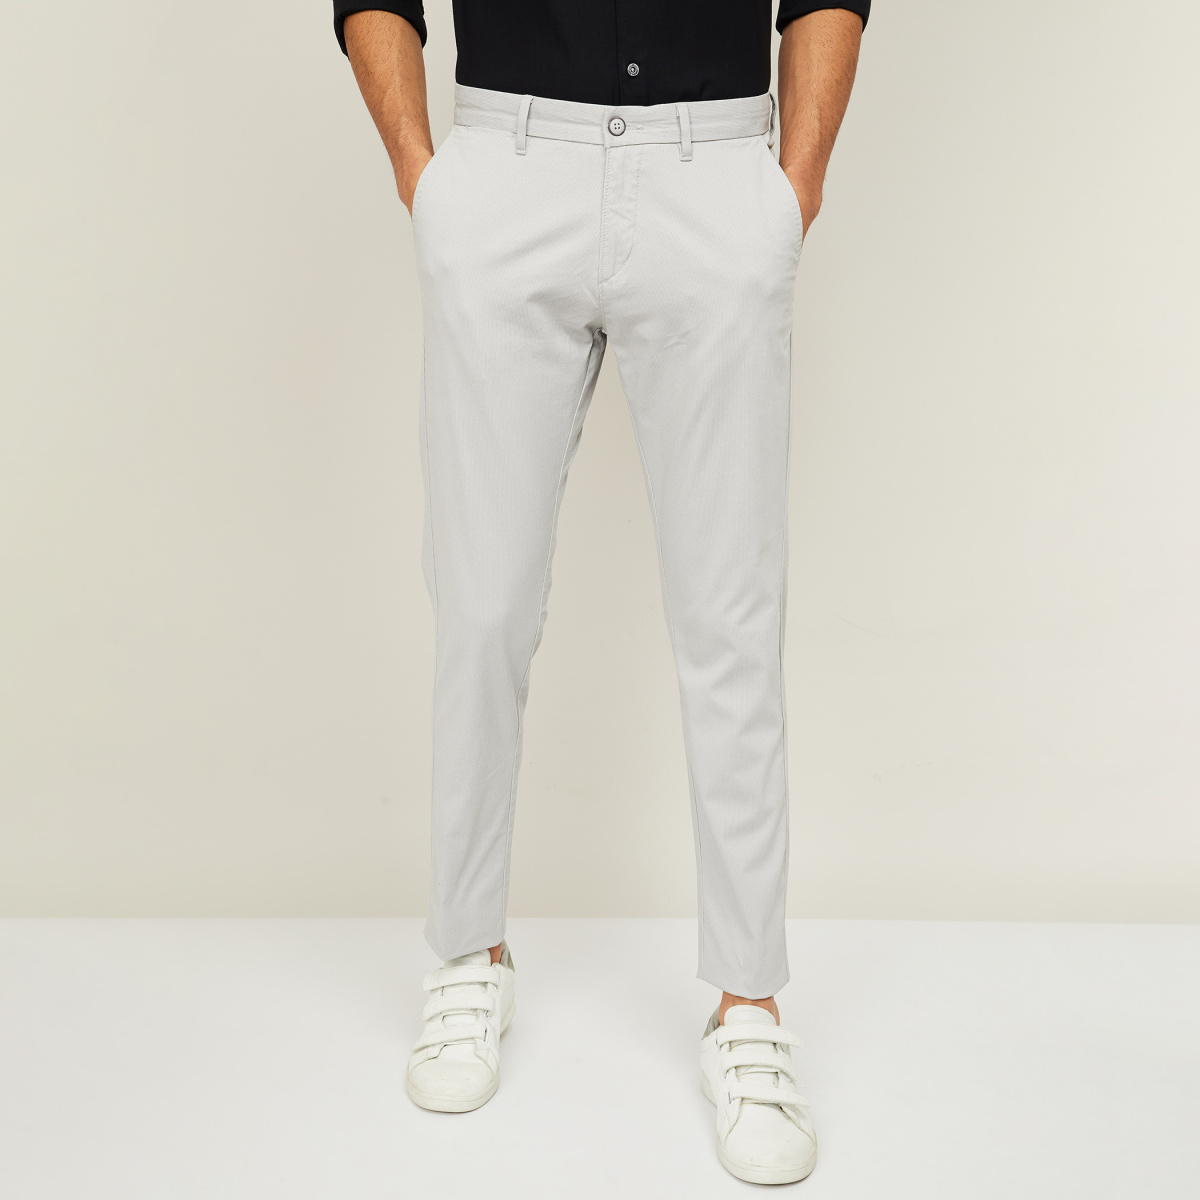 Buy U.S. Polo Assn. Men Grey Super Slim Fit Solid Formal Trousers - Trousers  for Men 7148132 | Myntra